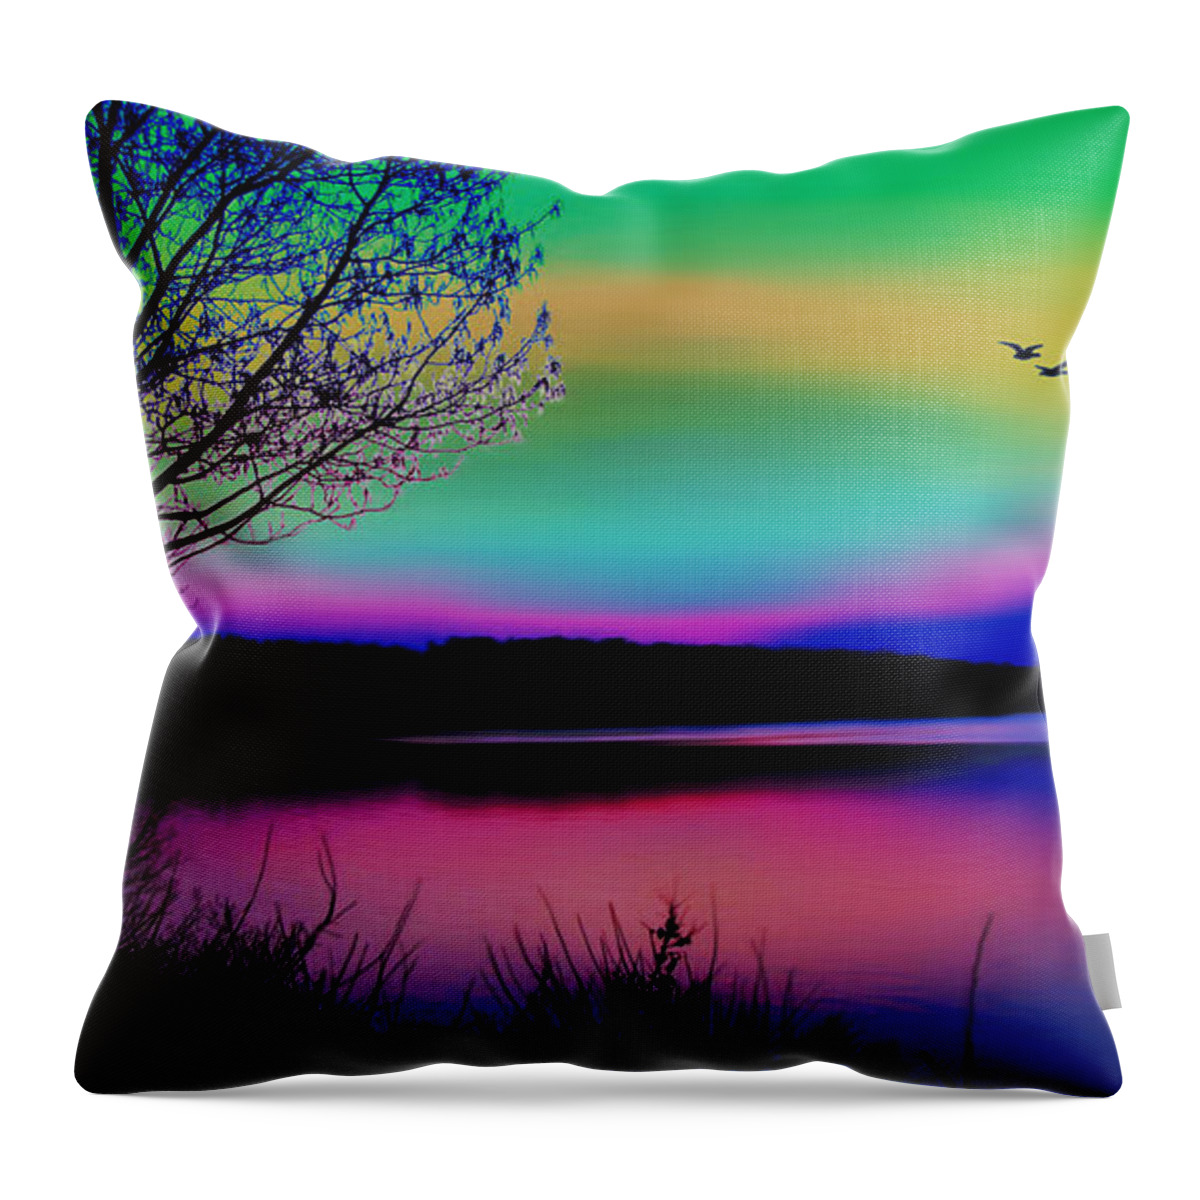 Water Throw Pillow featuring the digital art Lake 4 by Gregory Murray